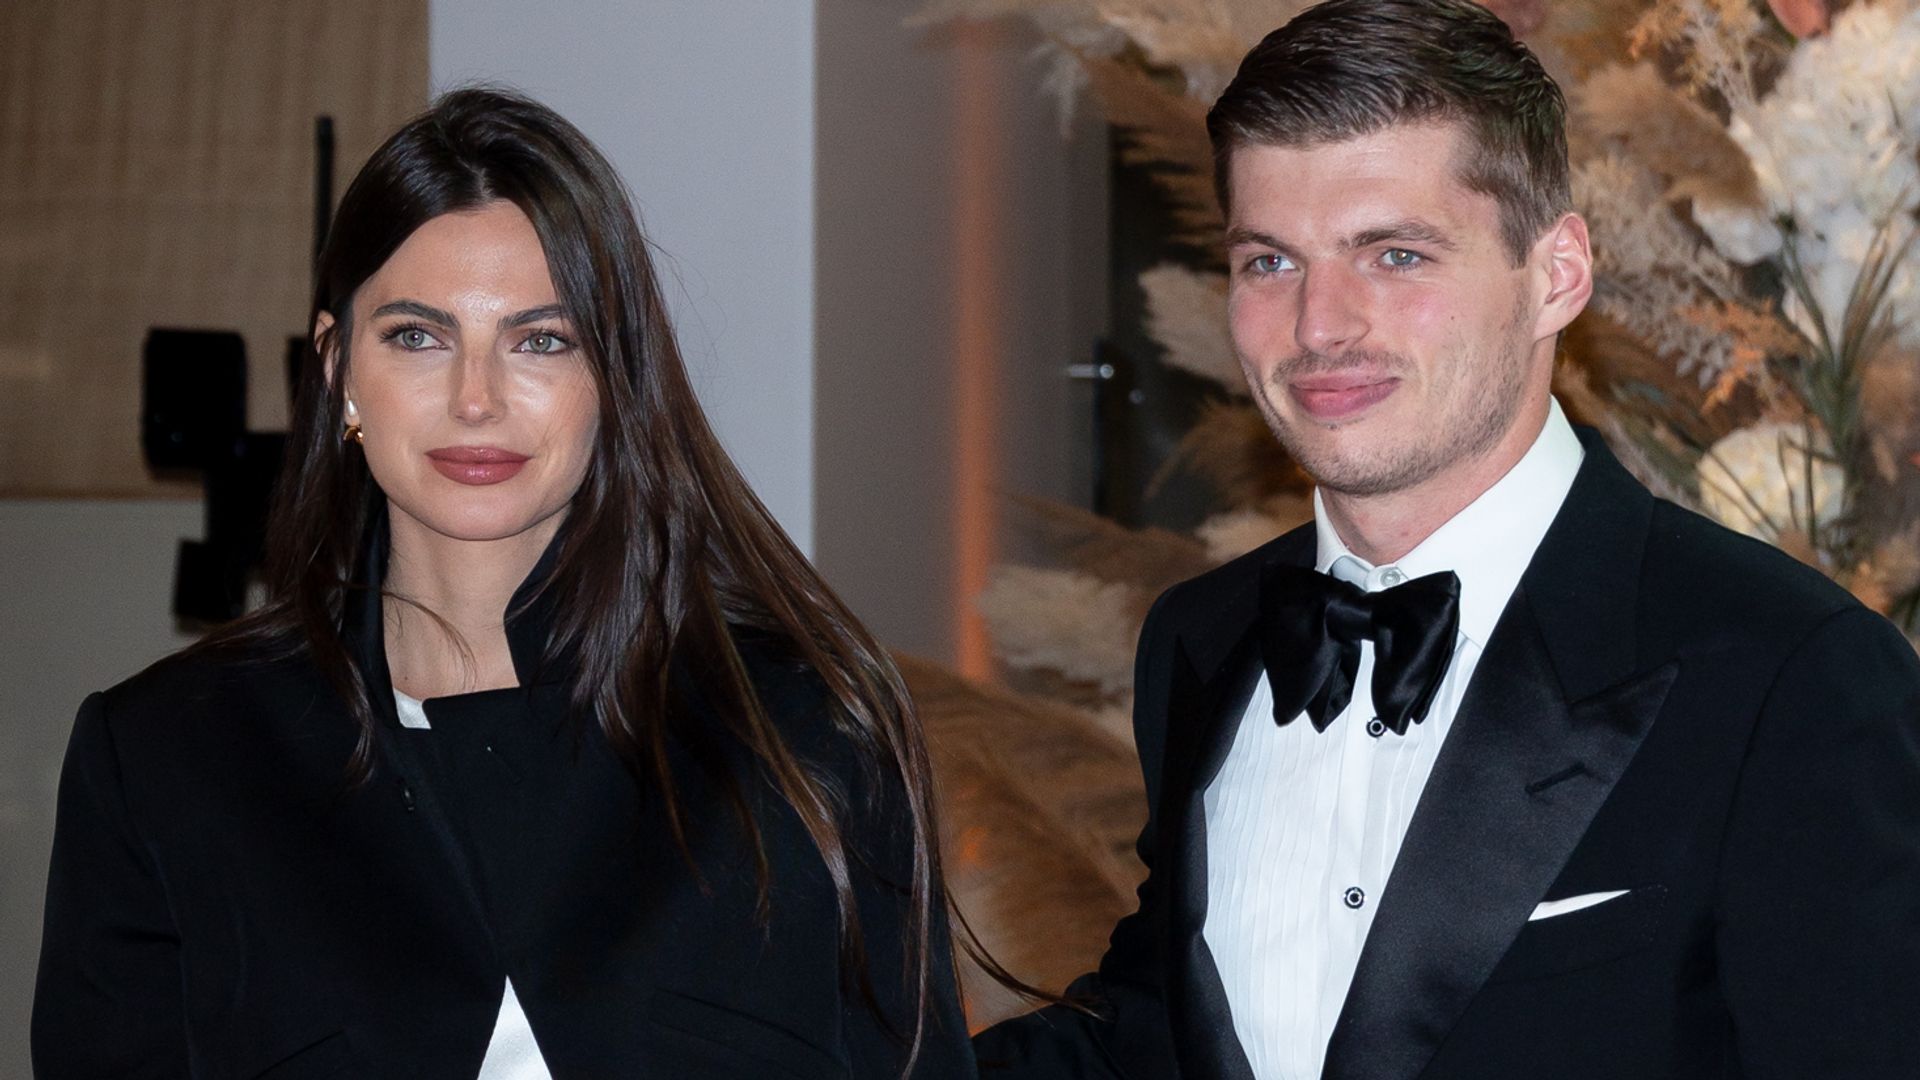 Kelly Piquet in a white dress and Max Verstappen in a tuxe